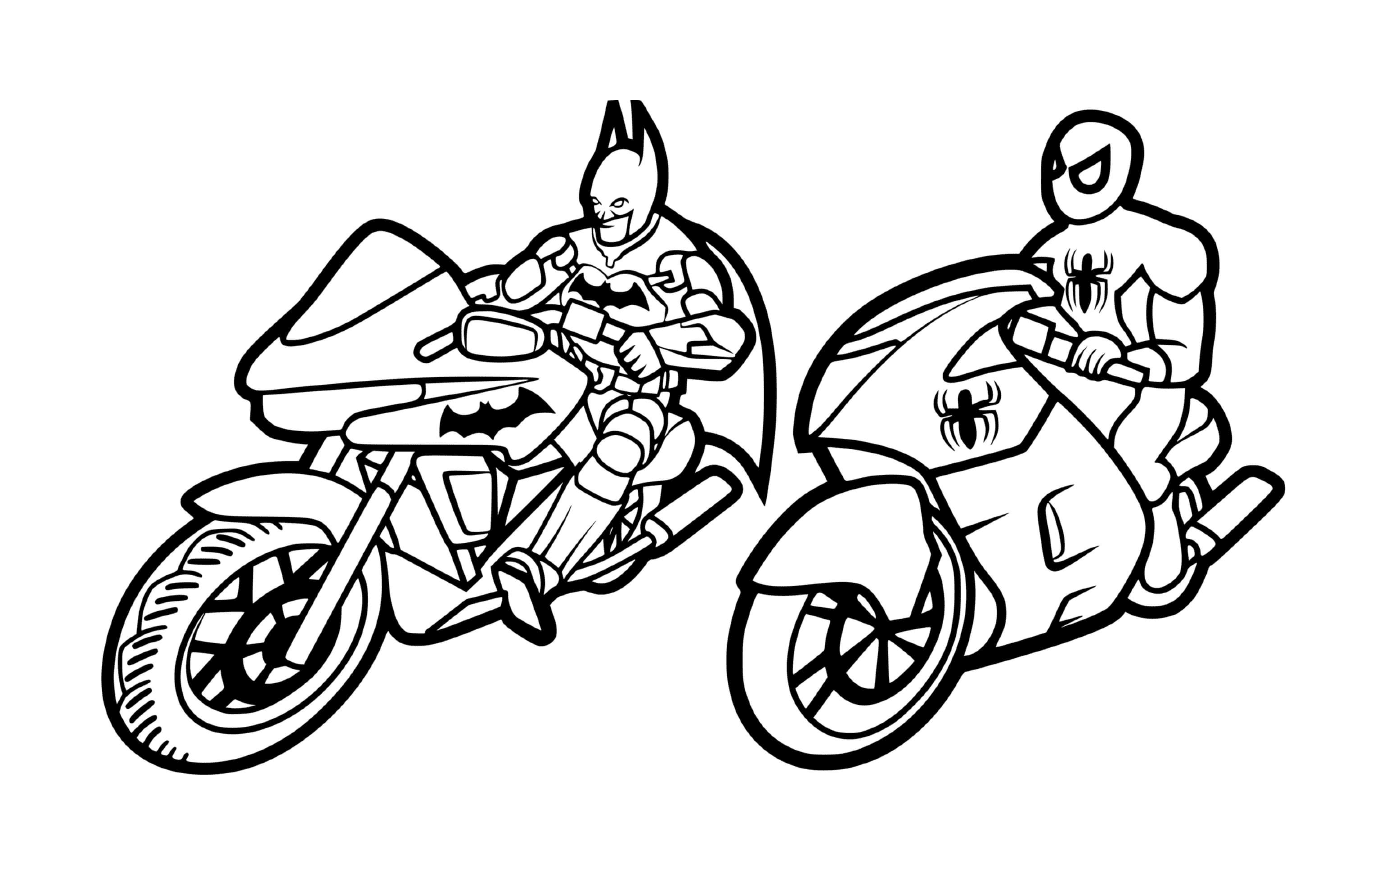  Batman and Spiderman by motorcycle 